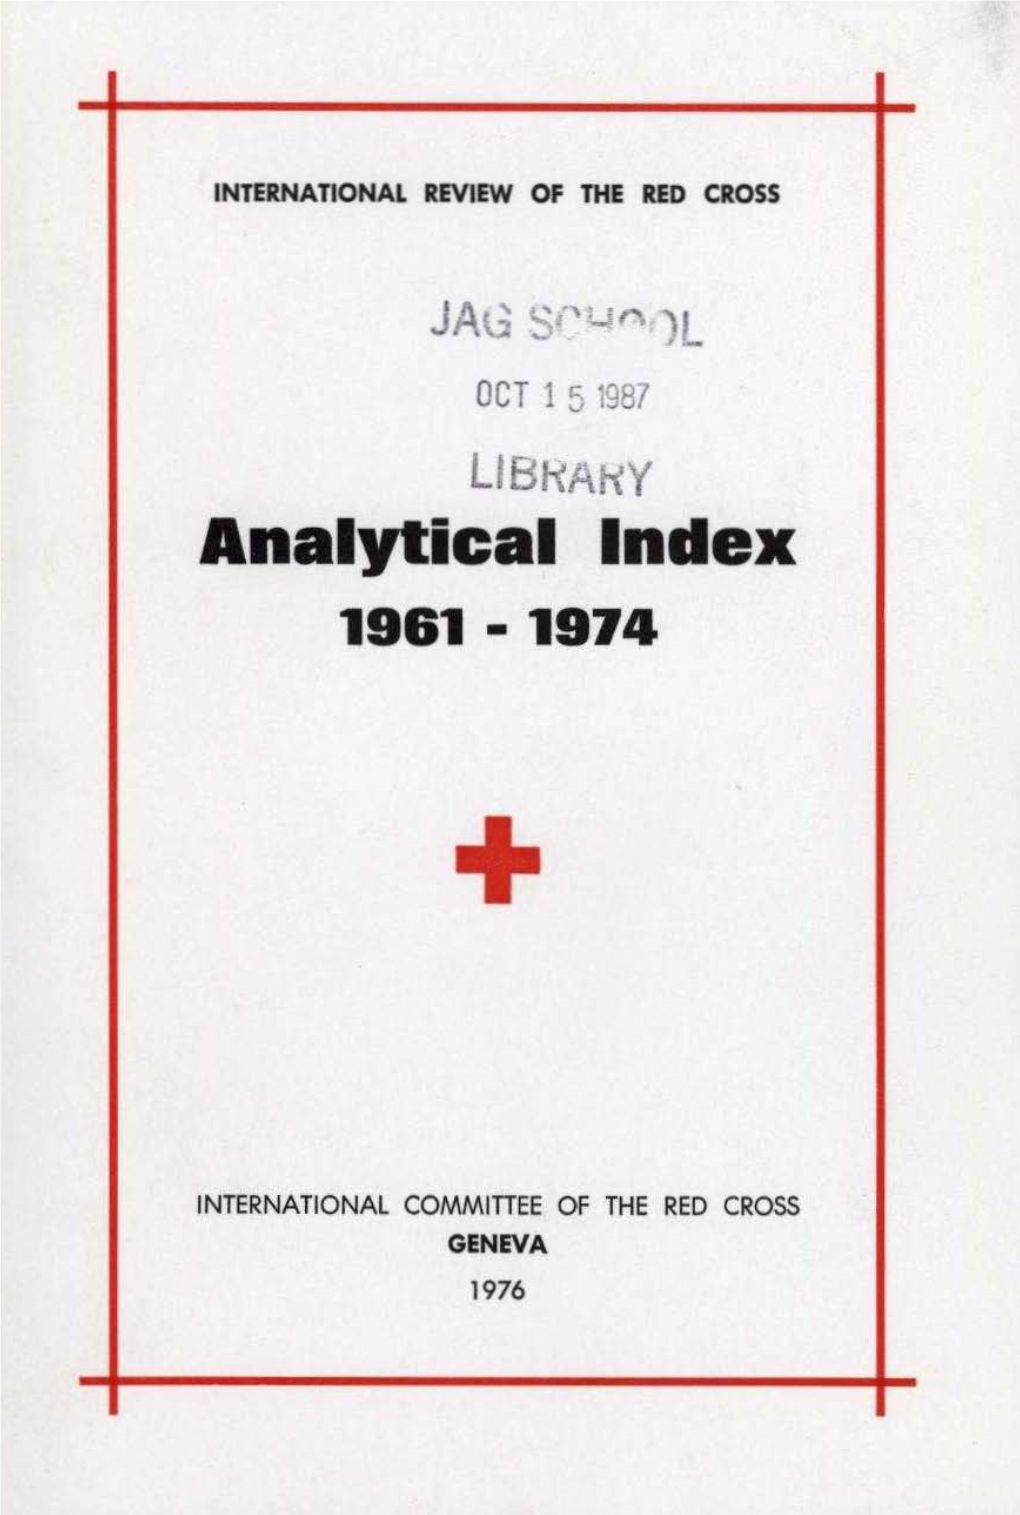 Analytical Index 1961-1974, International Review of the Red Cross